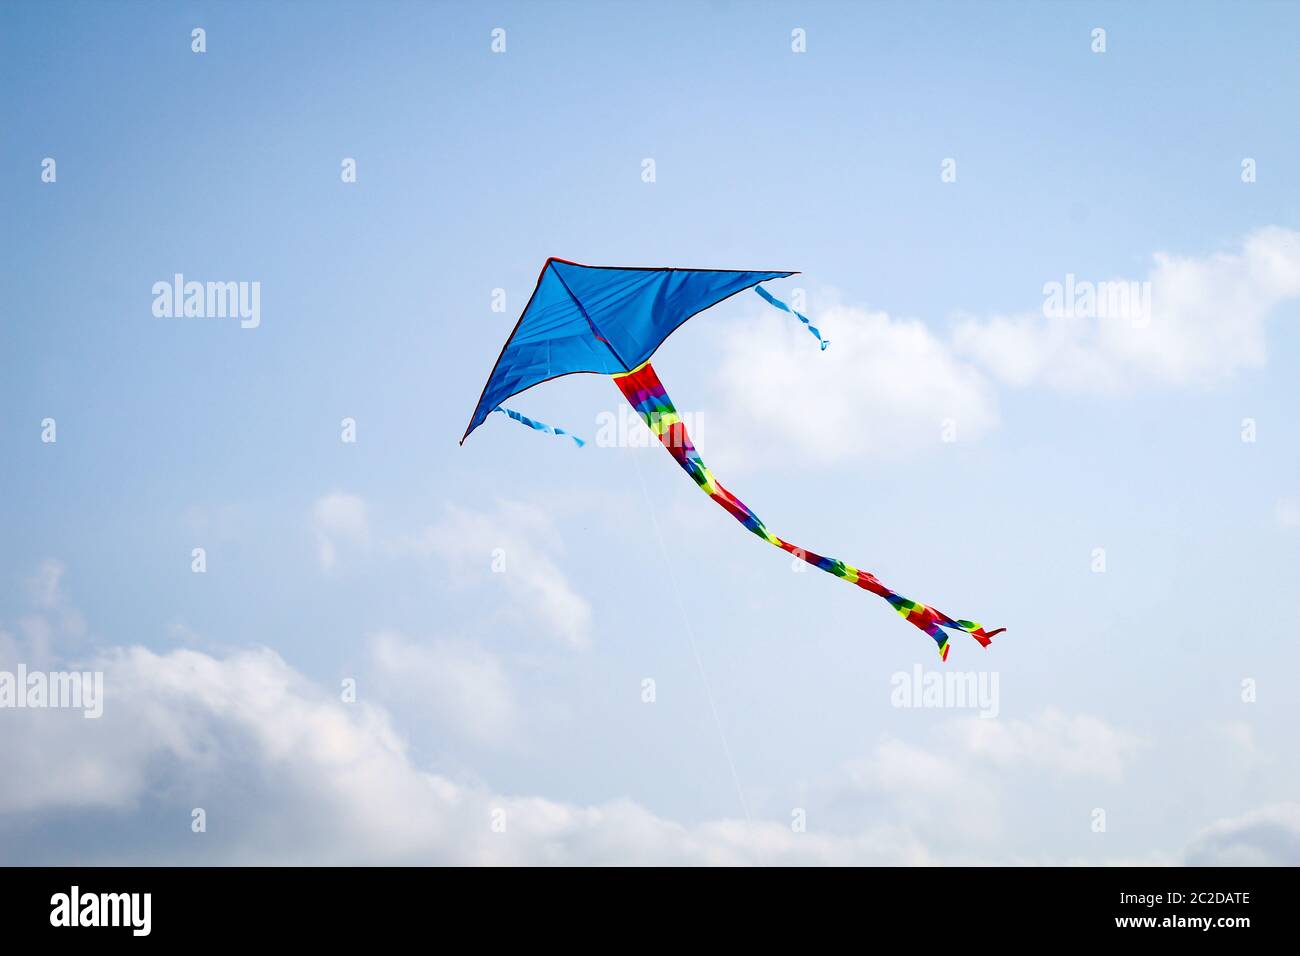 blue stunt kite in the sky at the baltic sea Stock Photo